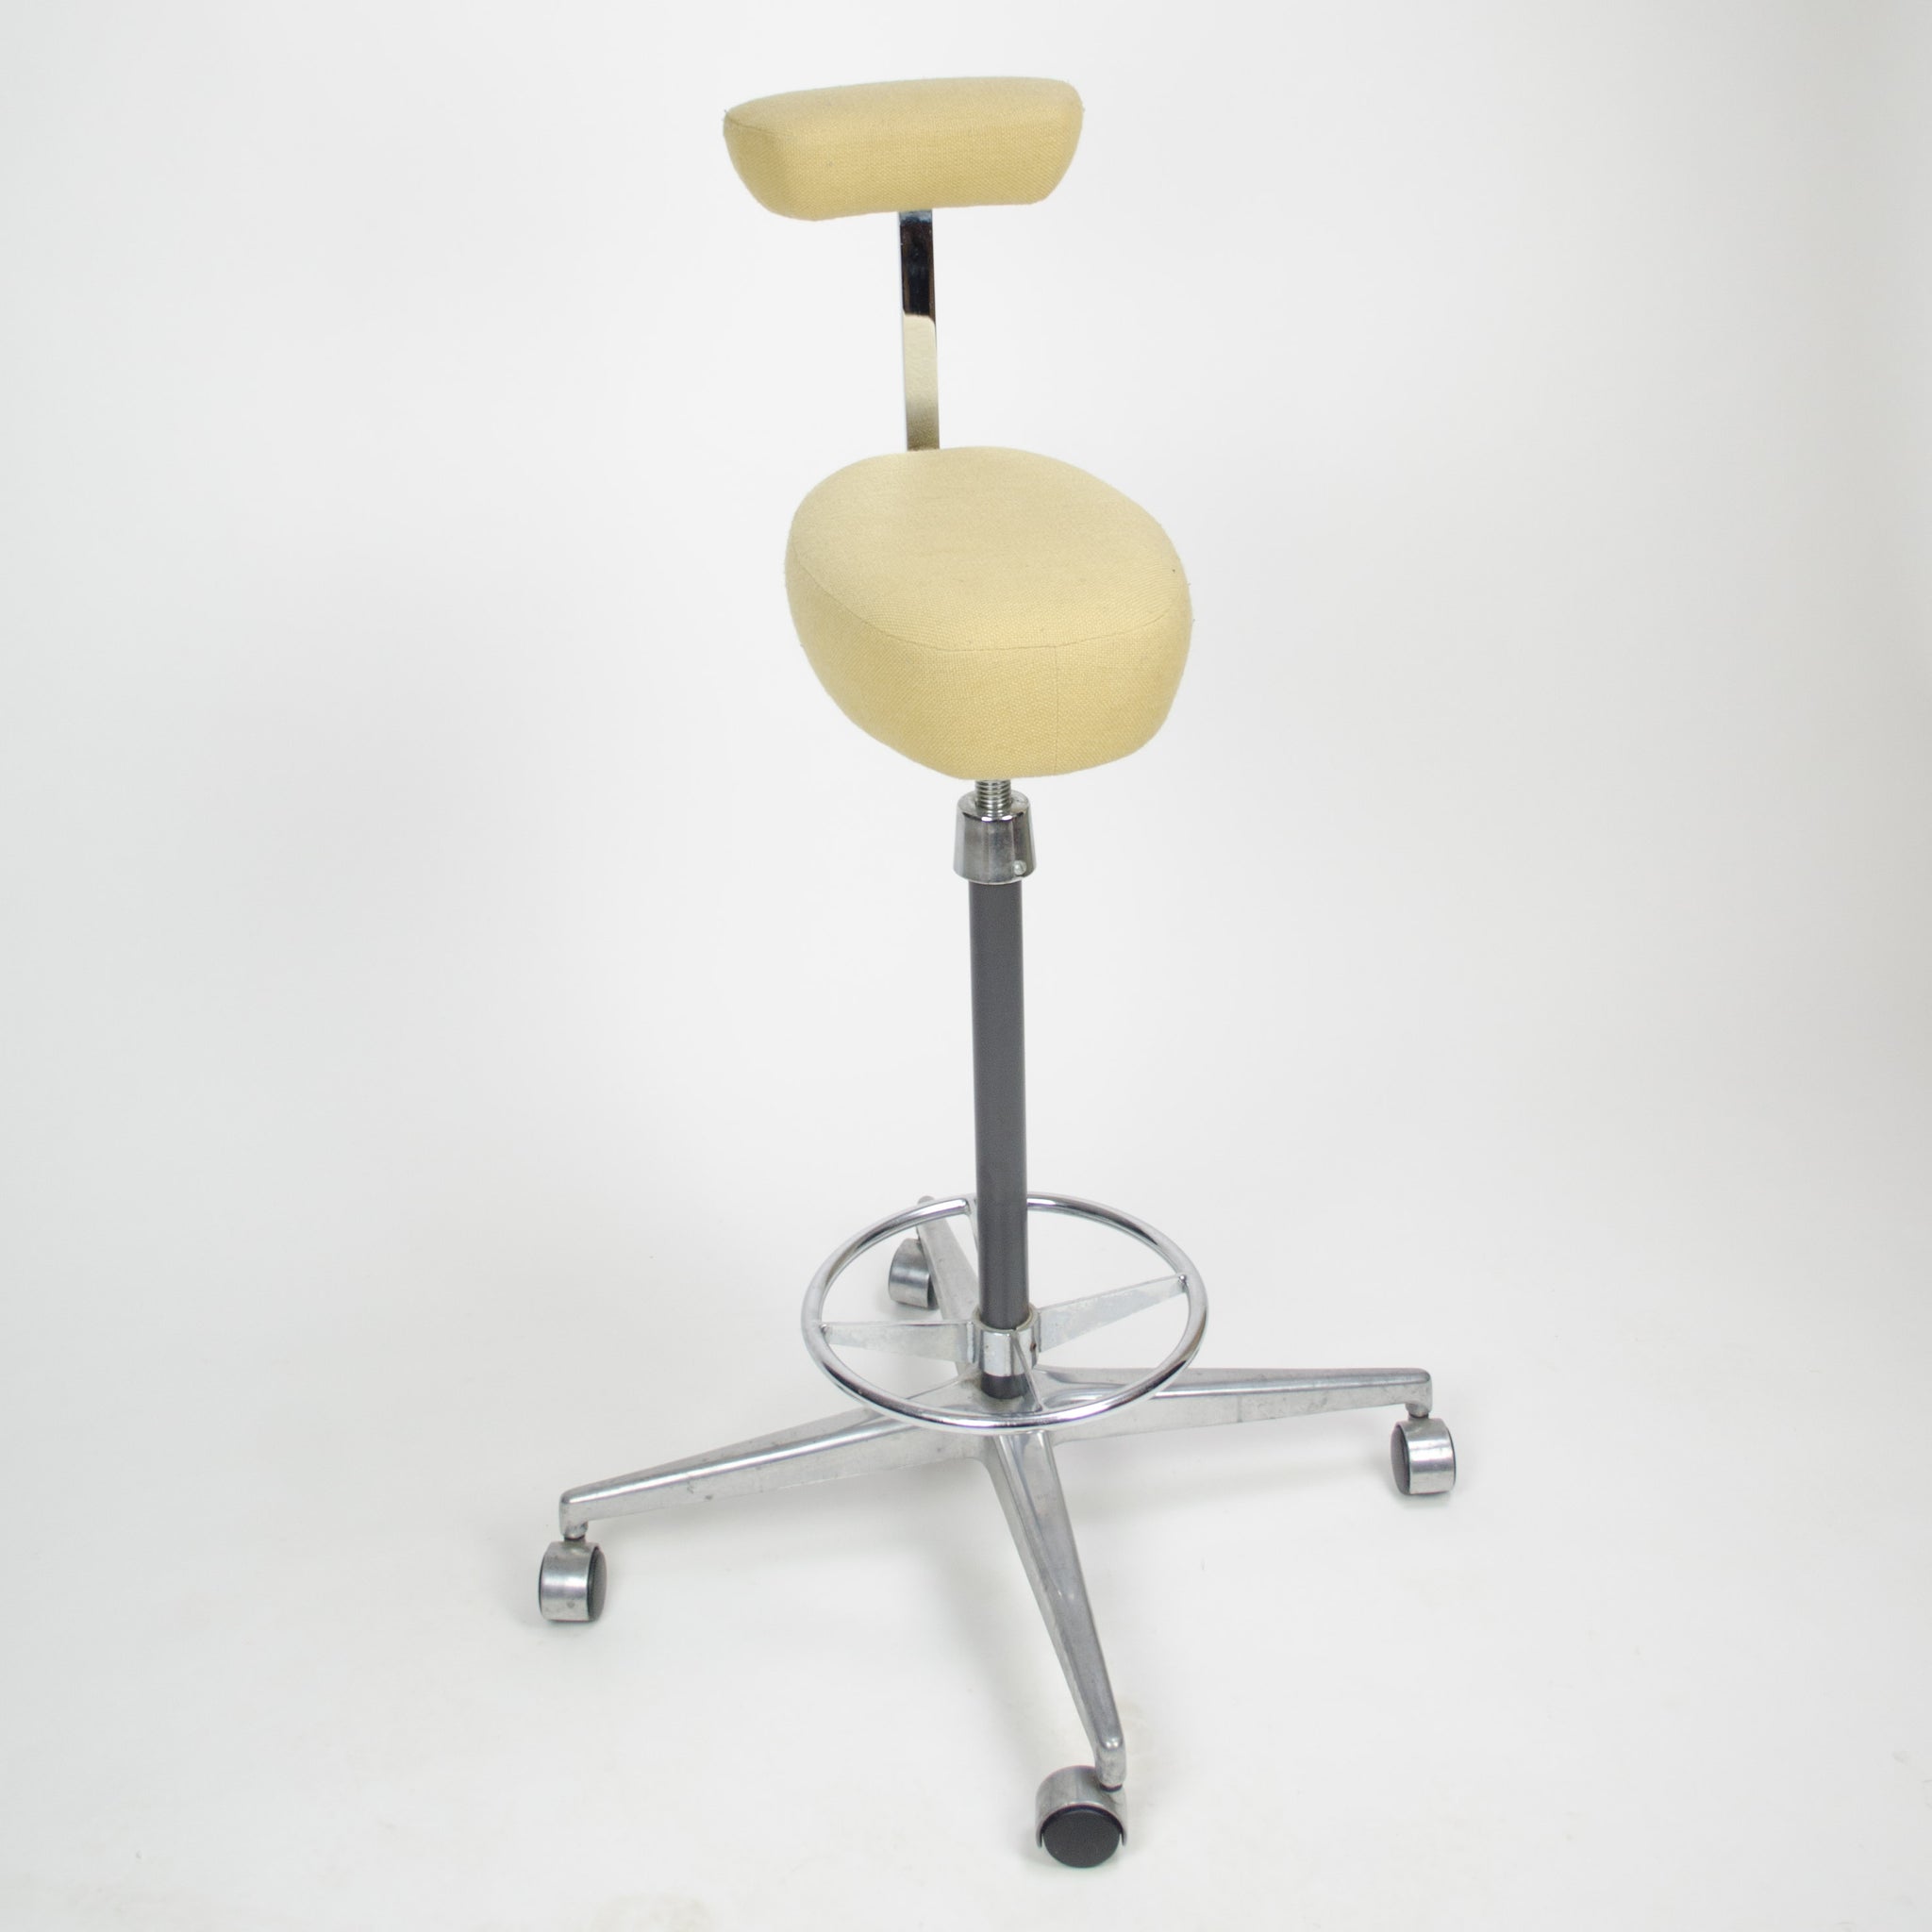 SOLD George Nelson Herman Miller Perch Drafting Stool Chair 1960's Fabric MINT!